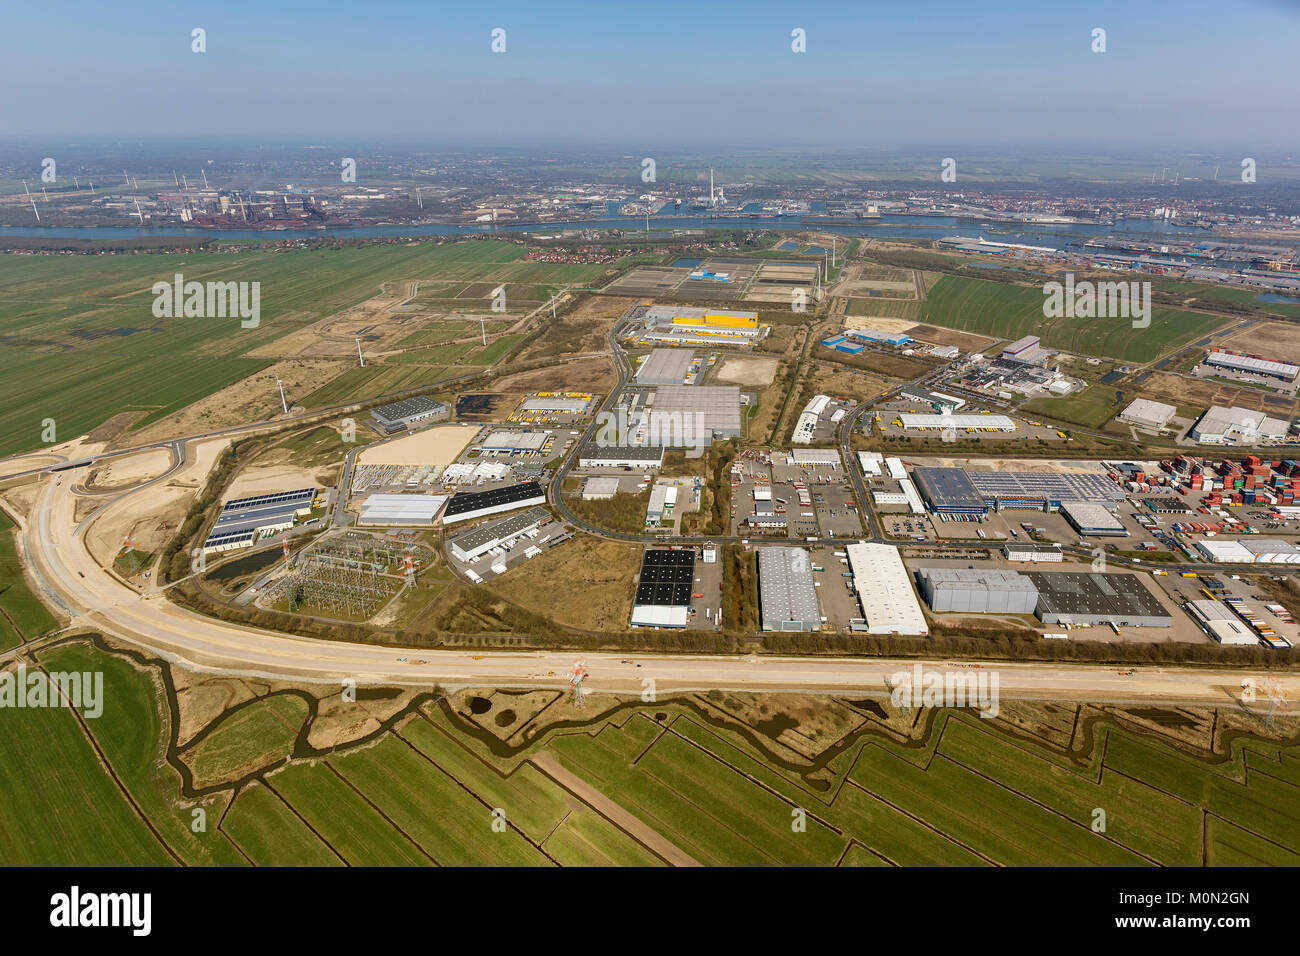 GVZ Bremen, goods distribution center, industrial zone south of the port of Bremen, aerial view, aerial photographs of Bremen, Bremen, Germany, Europe Stock Photo